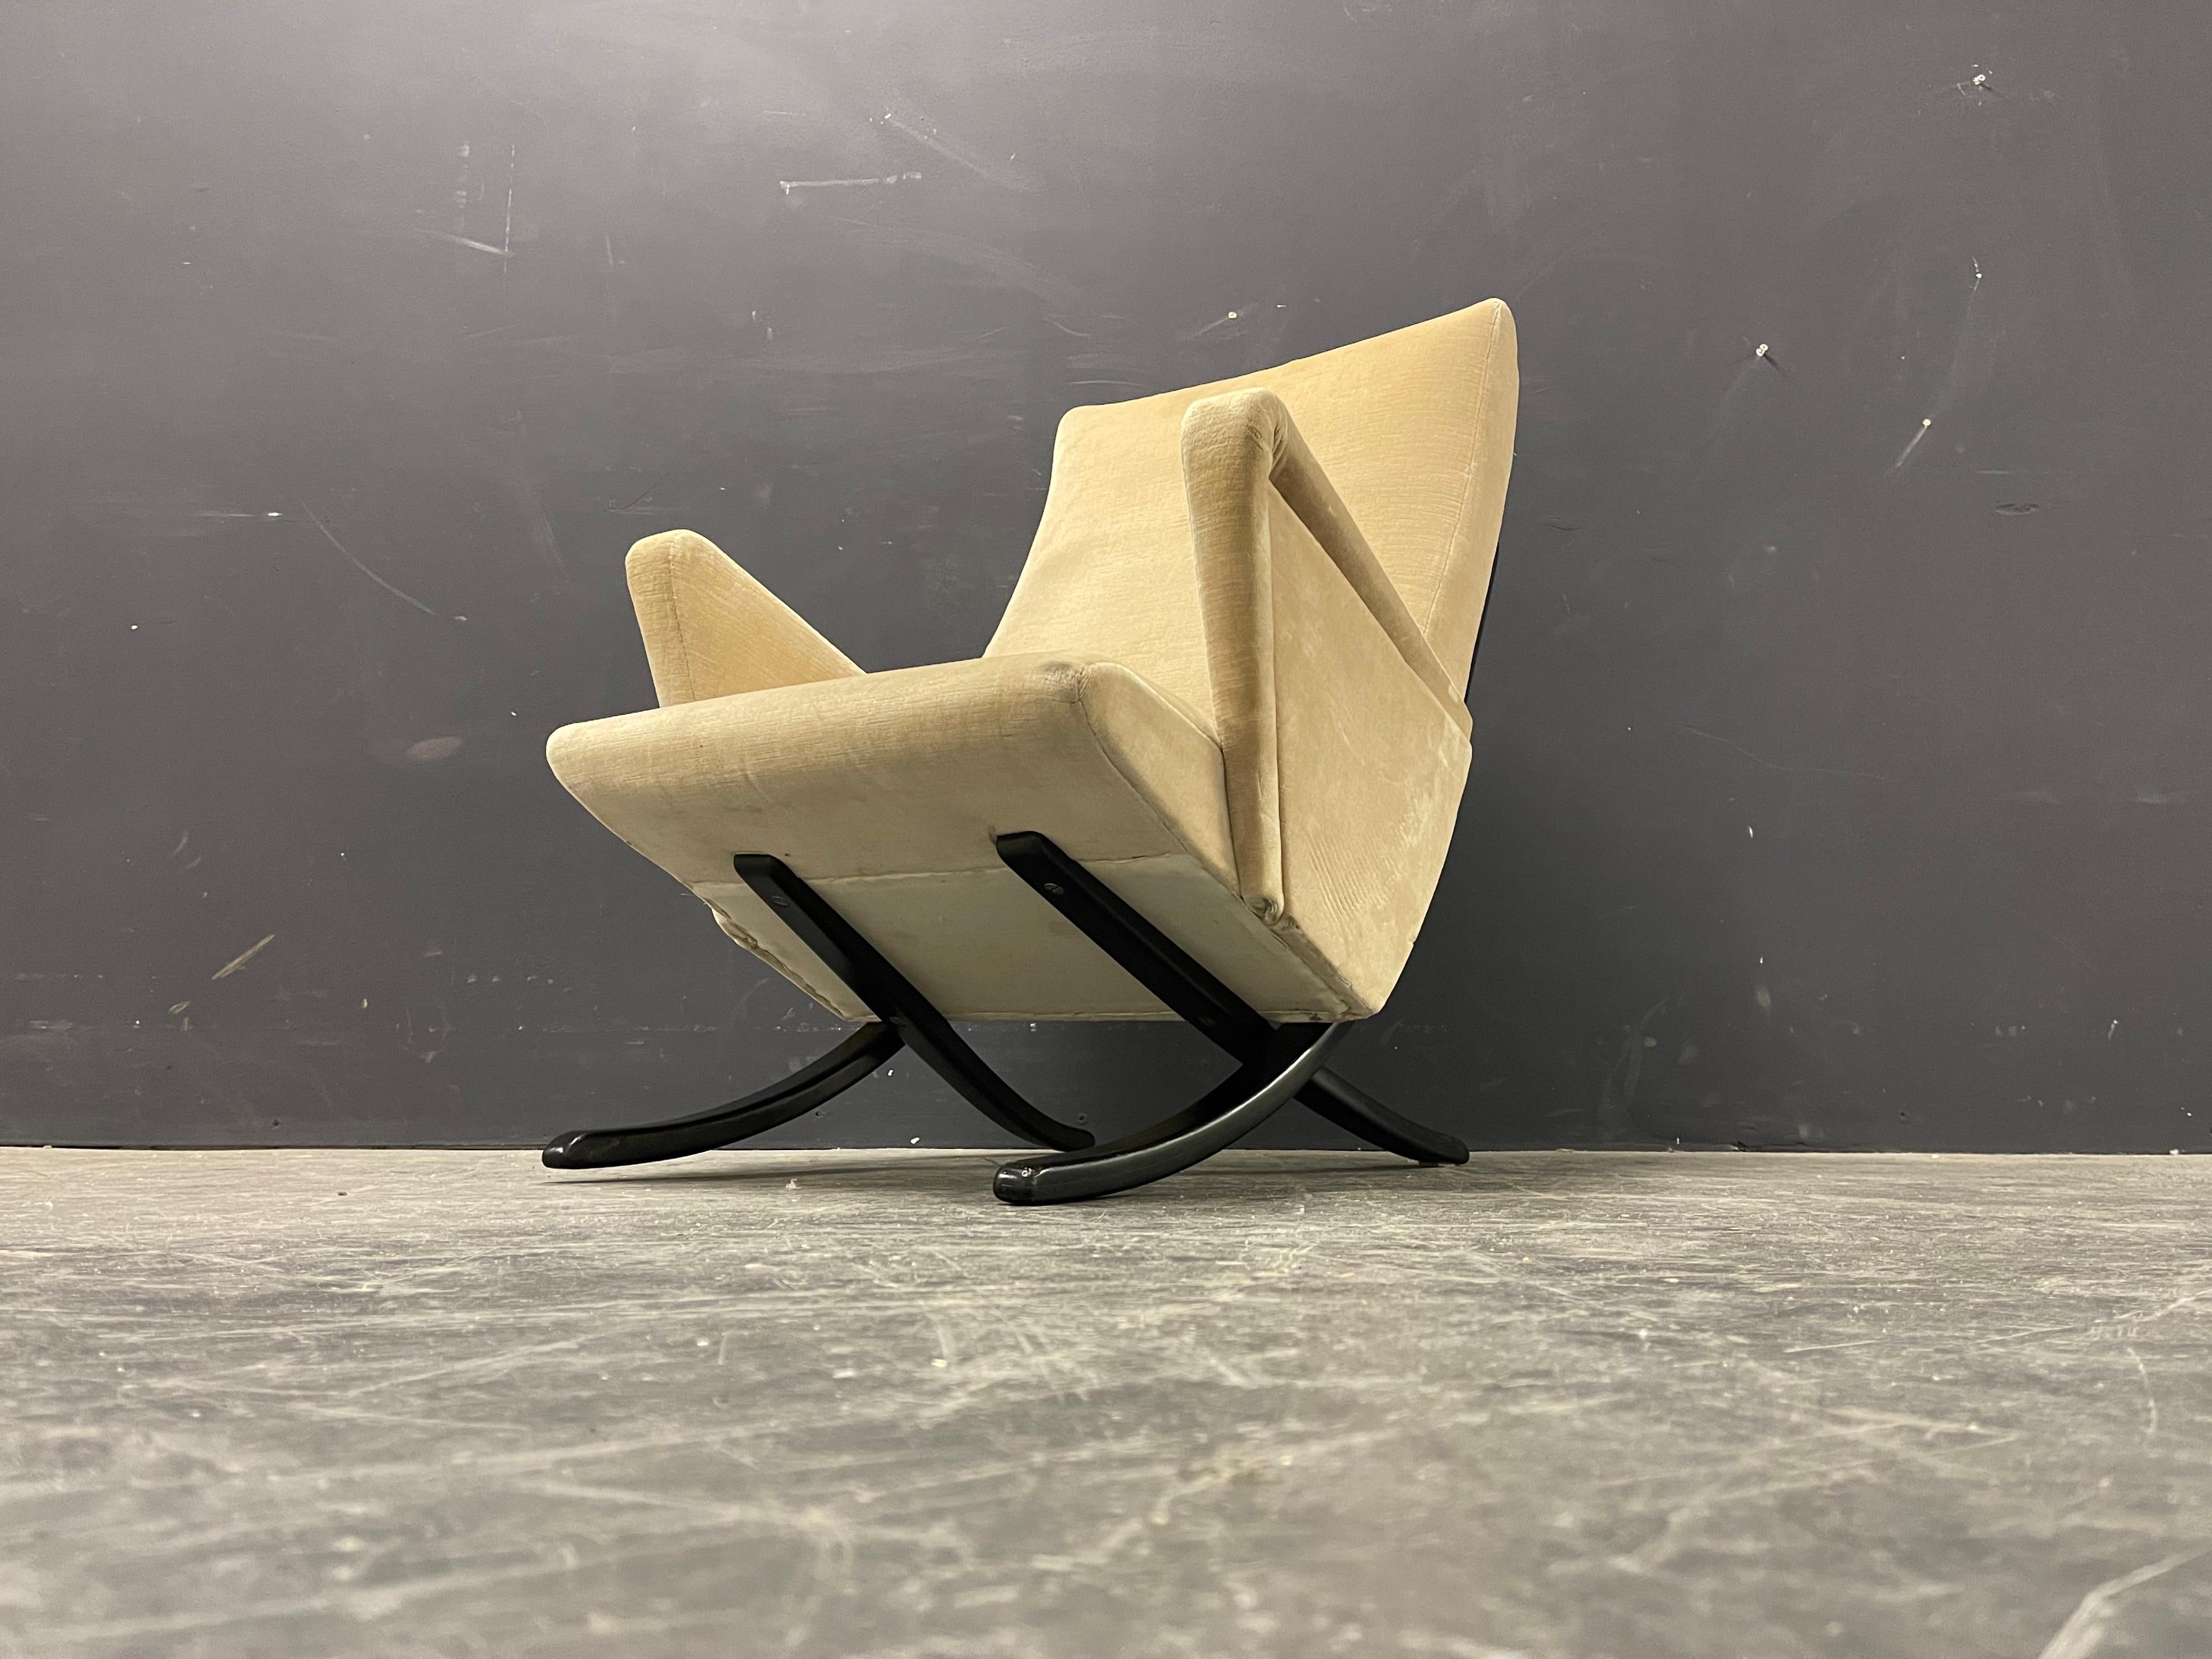 Only a handful of tectaform chairs showed up on auctions the last 10 years, but this version with arms is quite unknown. We own the only before known chair...... It´s a very rare version of model no. 8xx.

Arnold bode is an artist, designer and